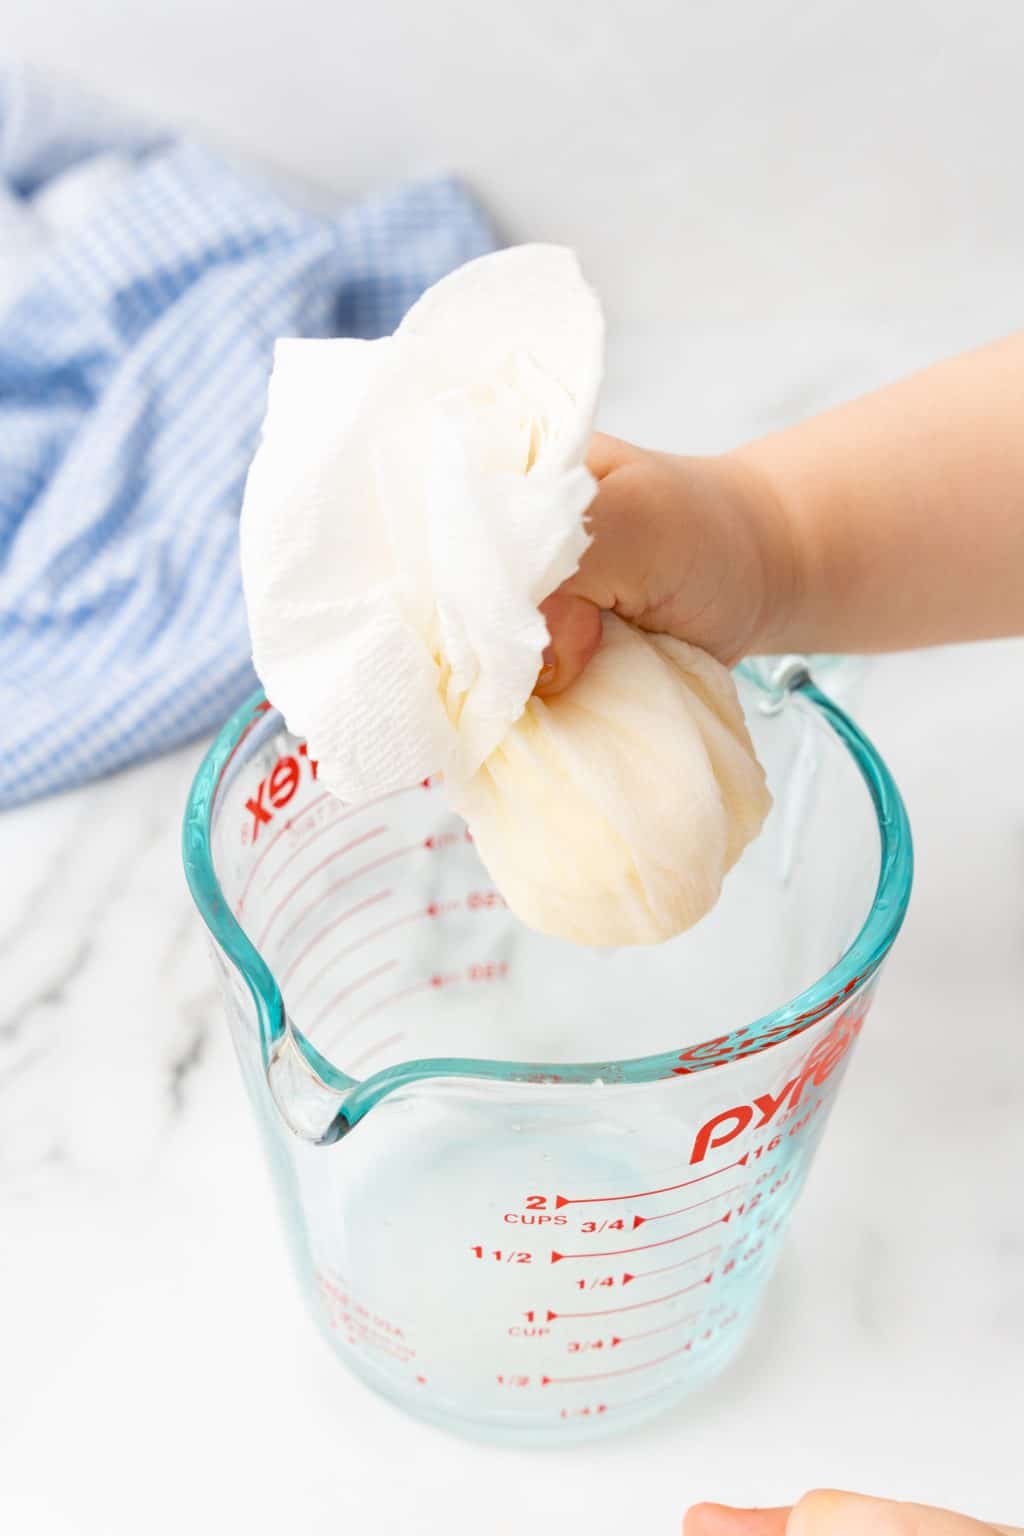 How To Make Homemade Butter In A Mason Jar - 4 Sons 'R' Us